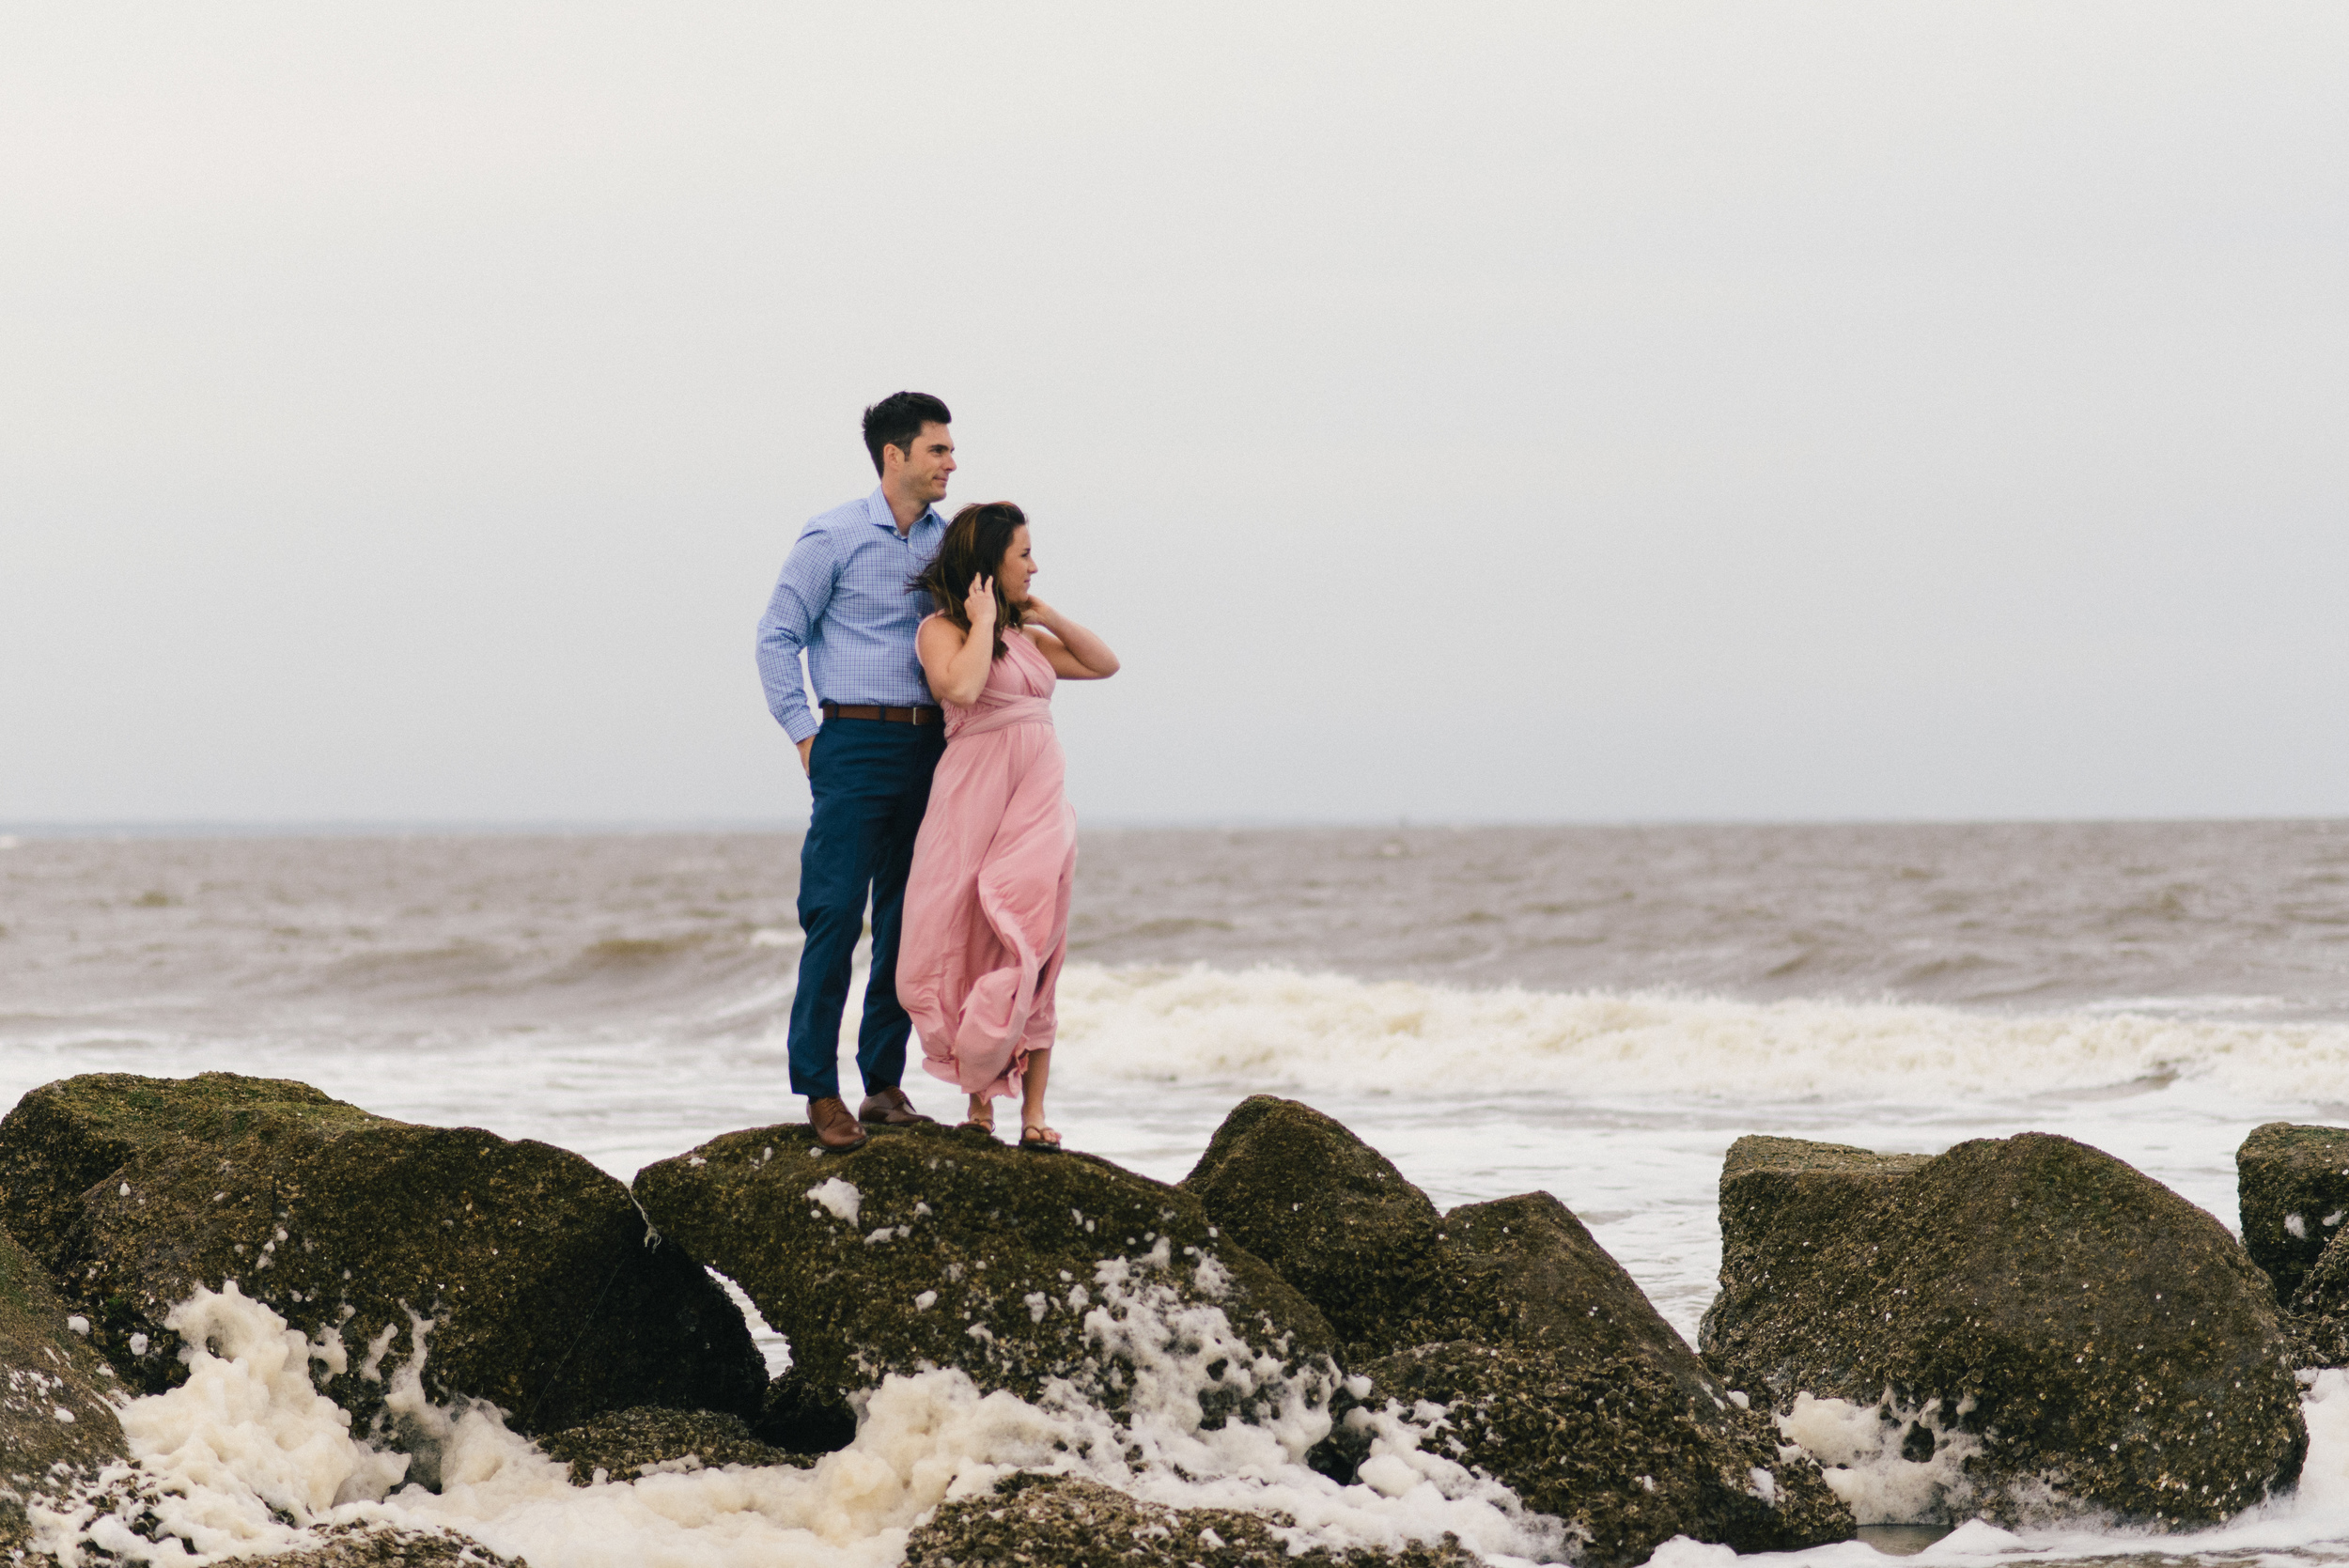 brownlyn-and-zach-tybee-island-engagement-session-april-2016-m-newsom-photography- (246 of 263).jpg